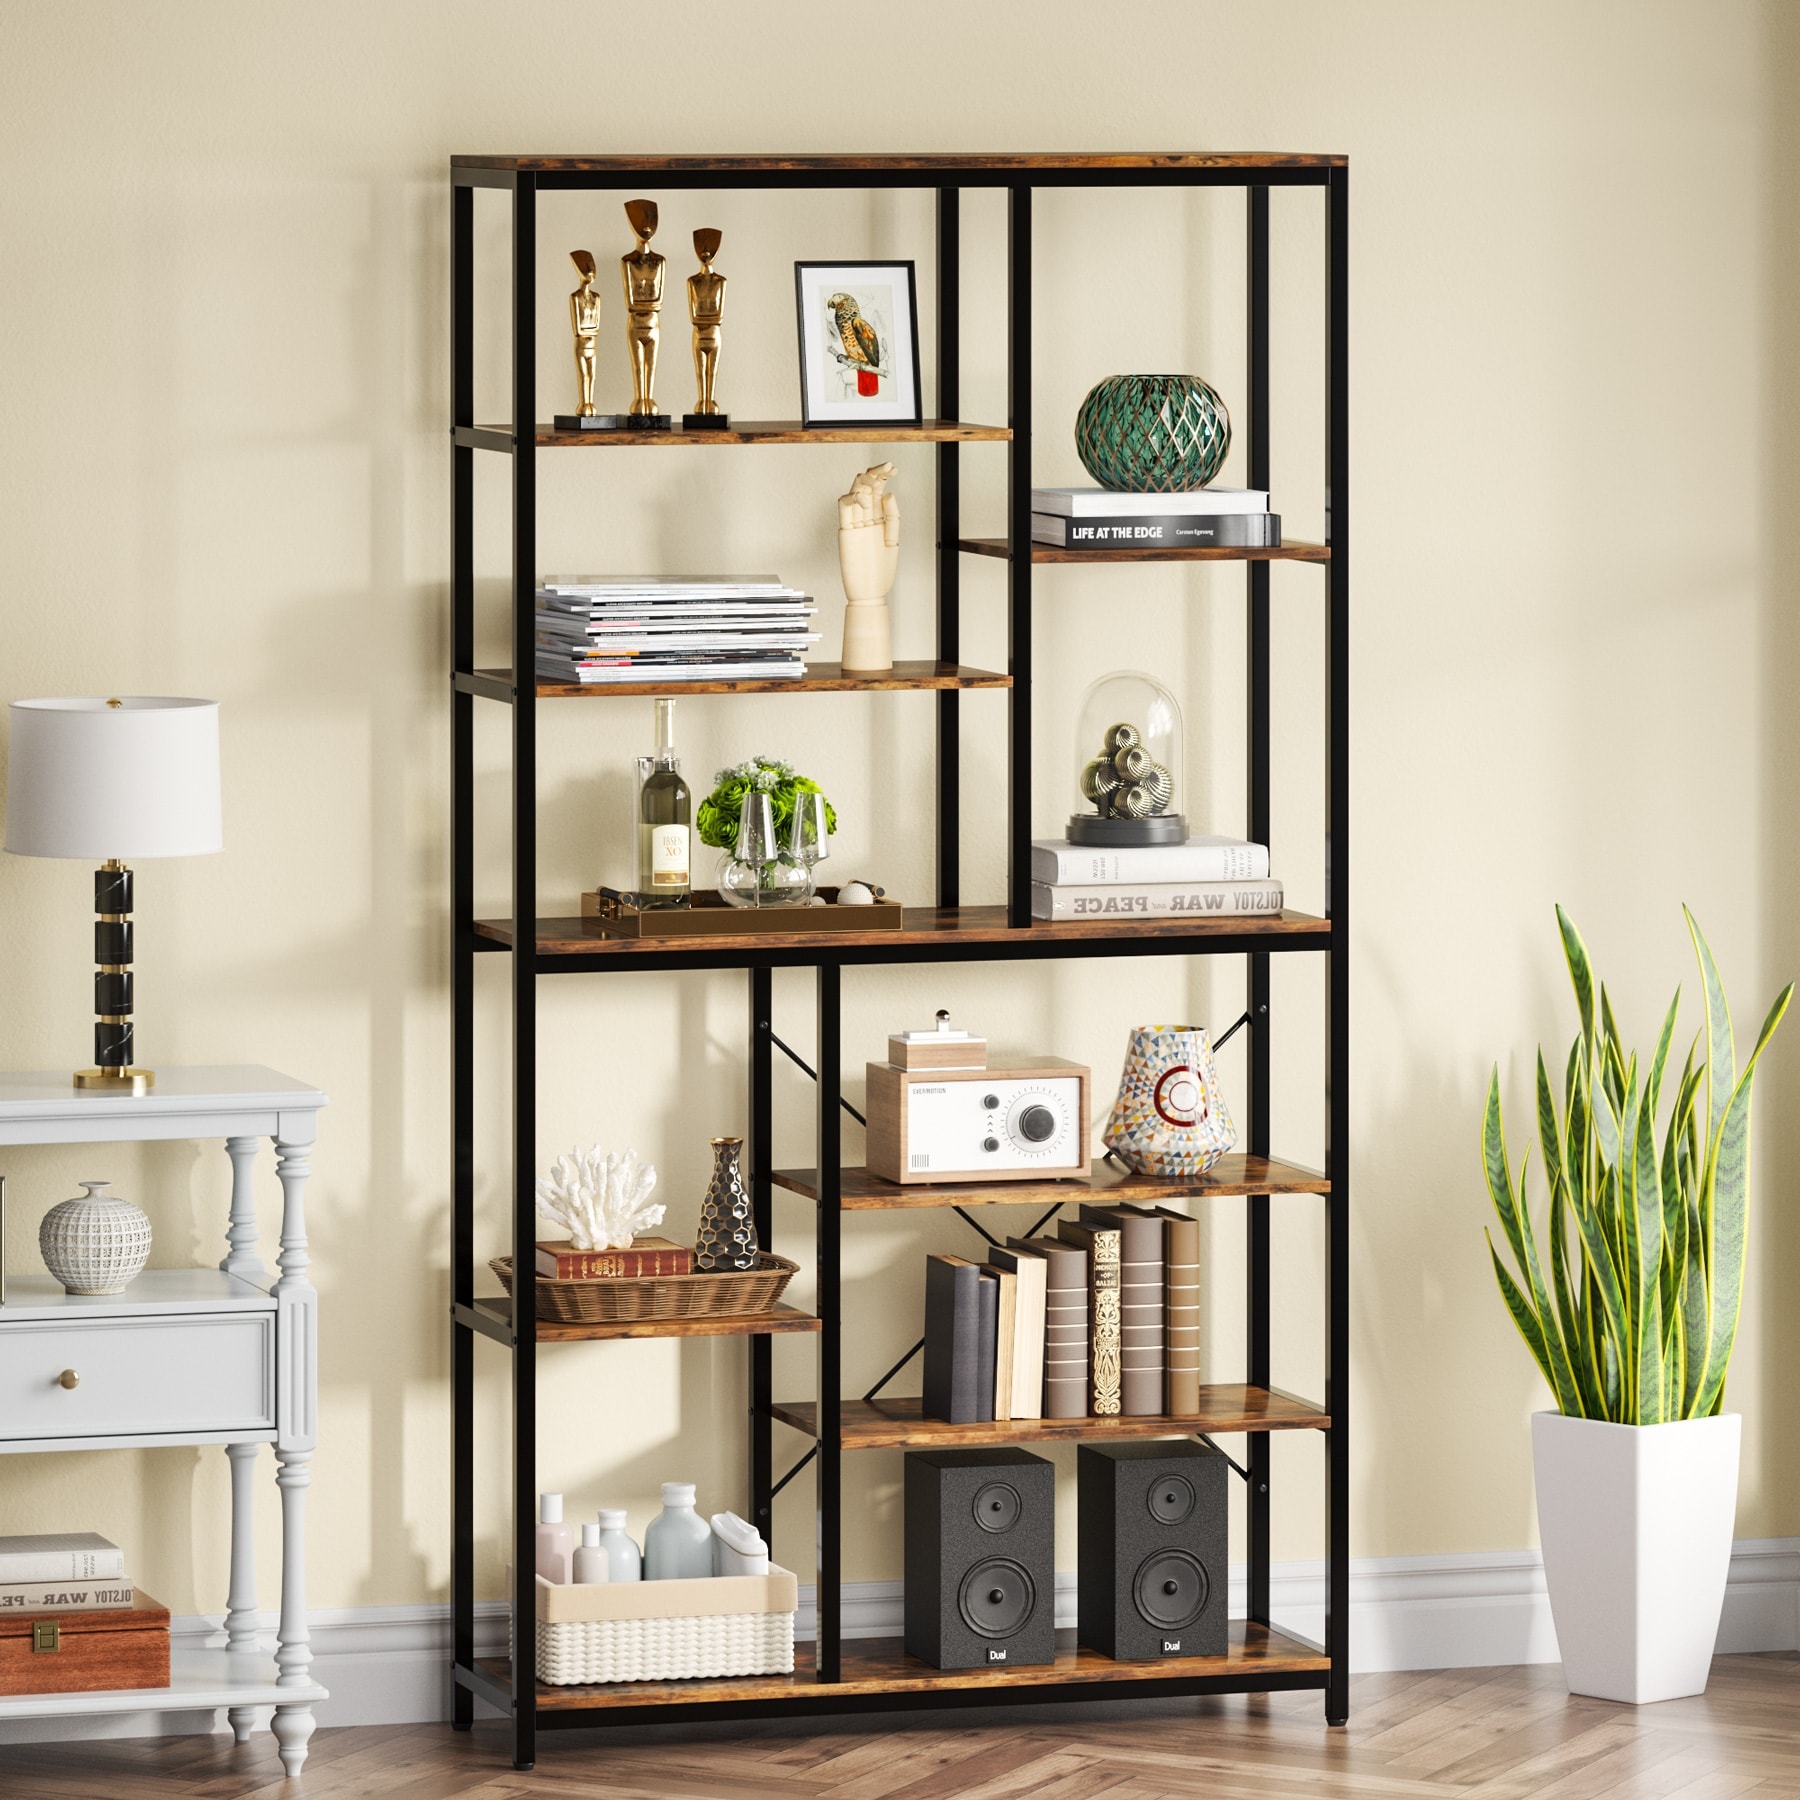 https://ak1.ostkcdn.com/images/products/is/images/direct/31aeb85d49a317b32a72e365dc209755e037ce23/Large-8-Tier-Bookcase-and-Bookshelf%2C-79%E2%80%99%E2%80%99-Tall-Open-Shelves-Display-Shelf-for-Home-Office%2C-Rustic.jpg